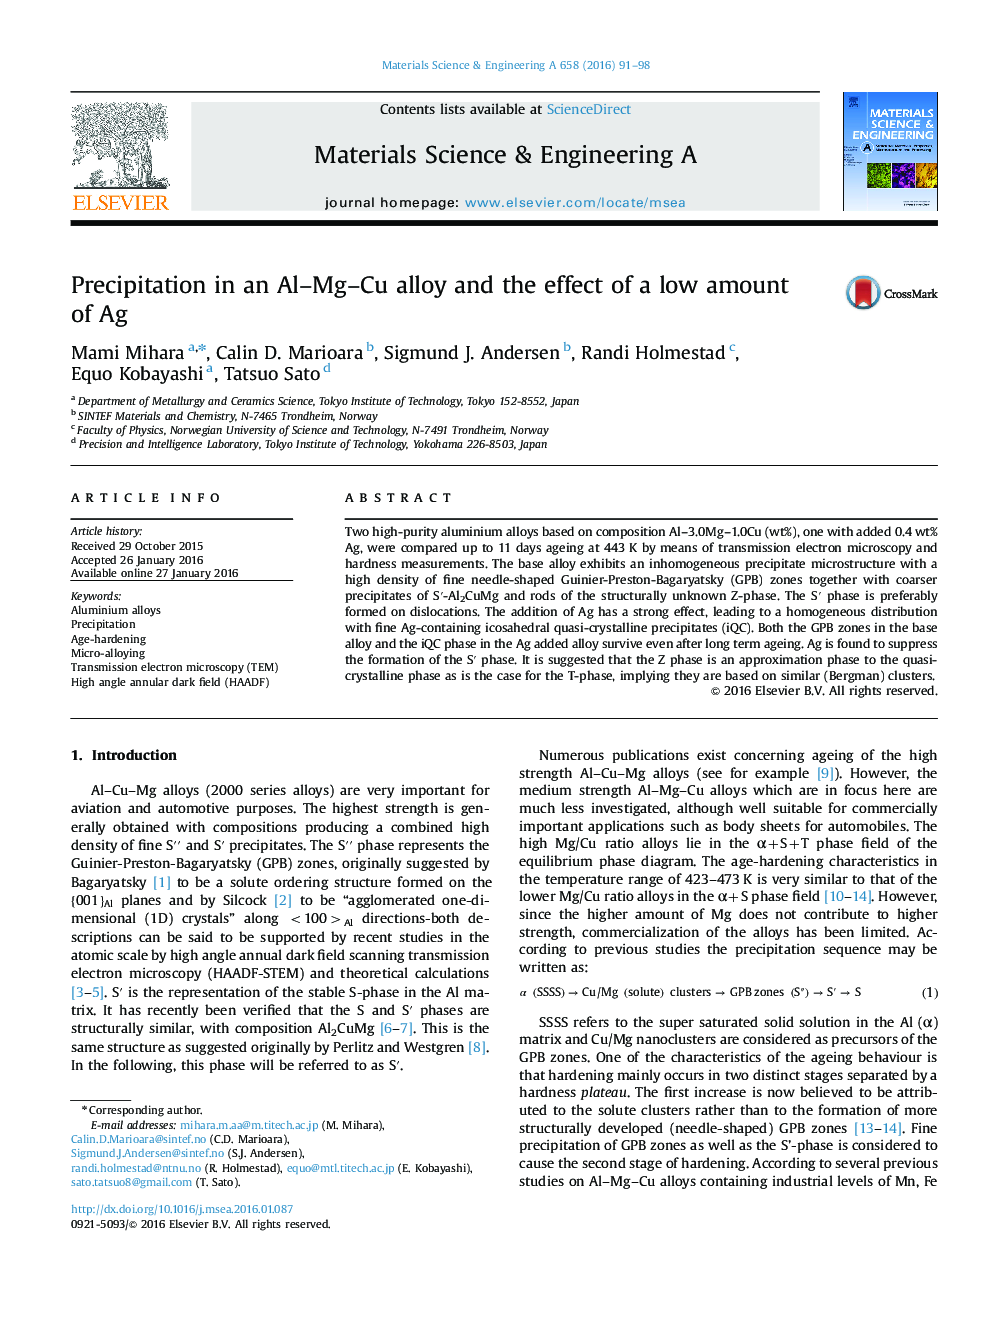 Precipitation in an Al–Mg–Cu alloy and the effect of a low amount of Ag